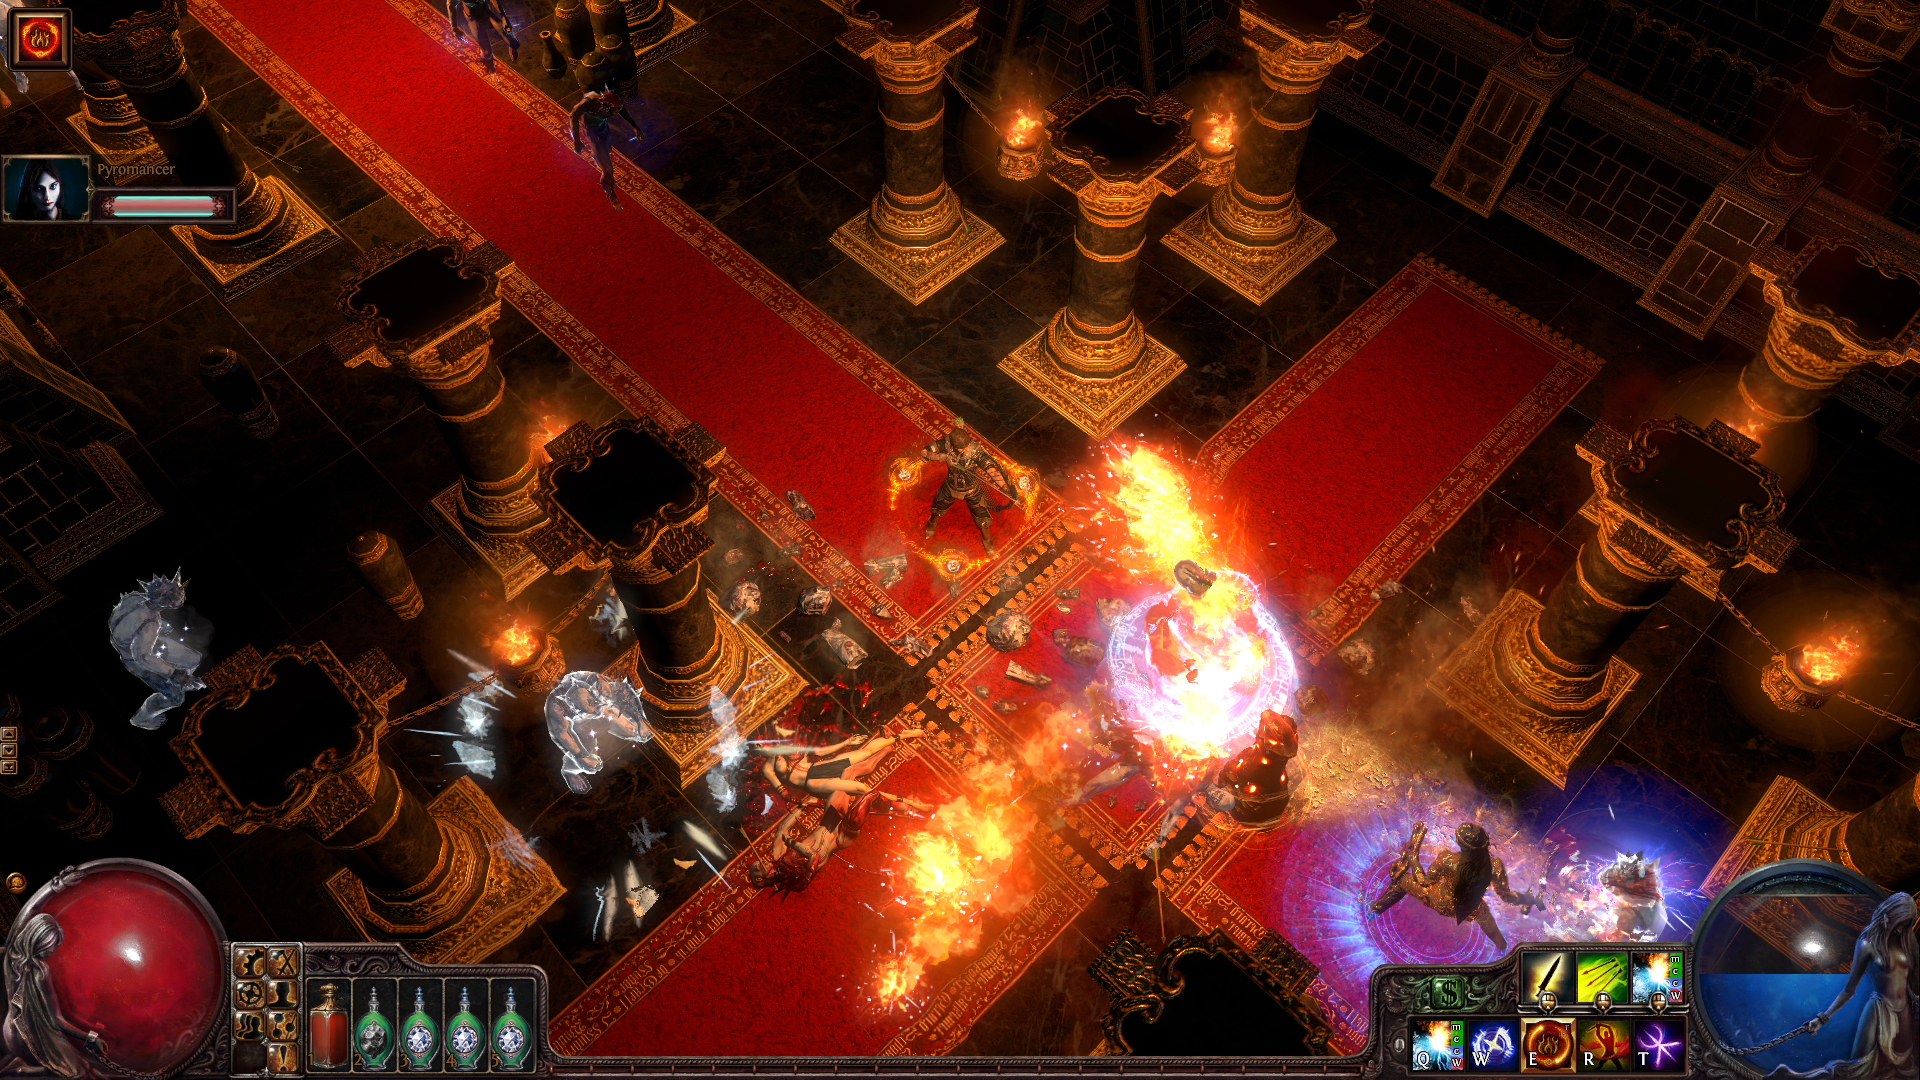 Ardor gaming exile. Path of Exile. Path of Exile screenshots. Path of Exile 2 screenshot.